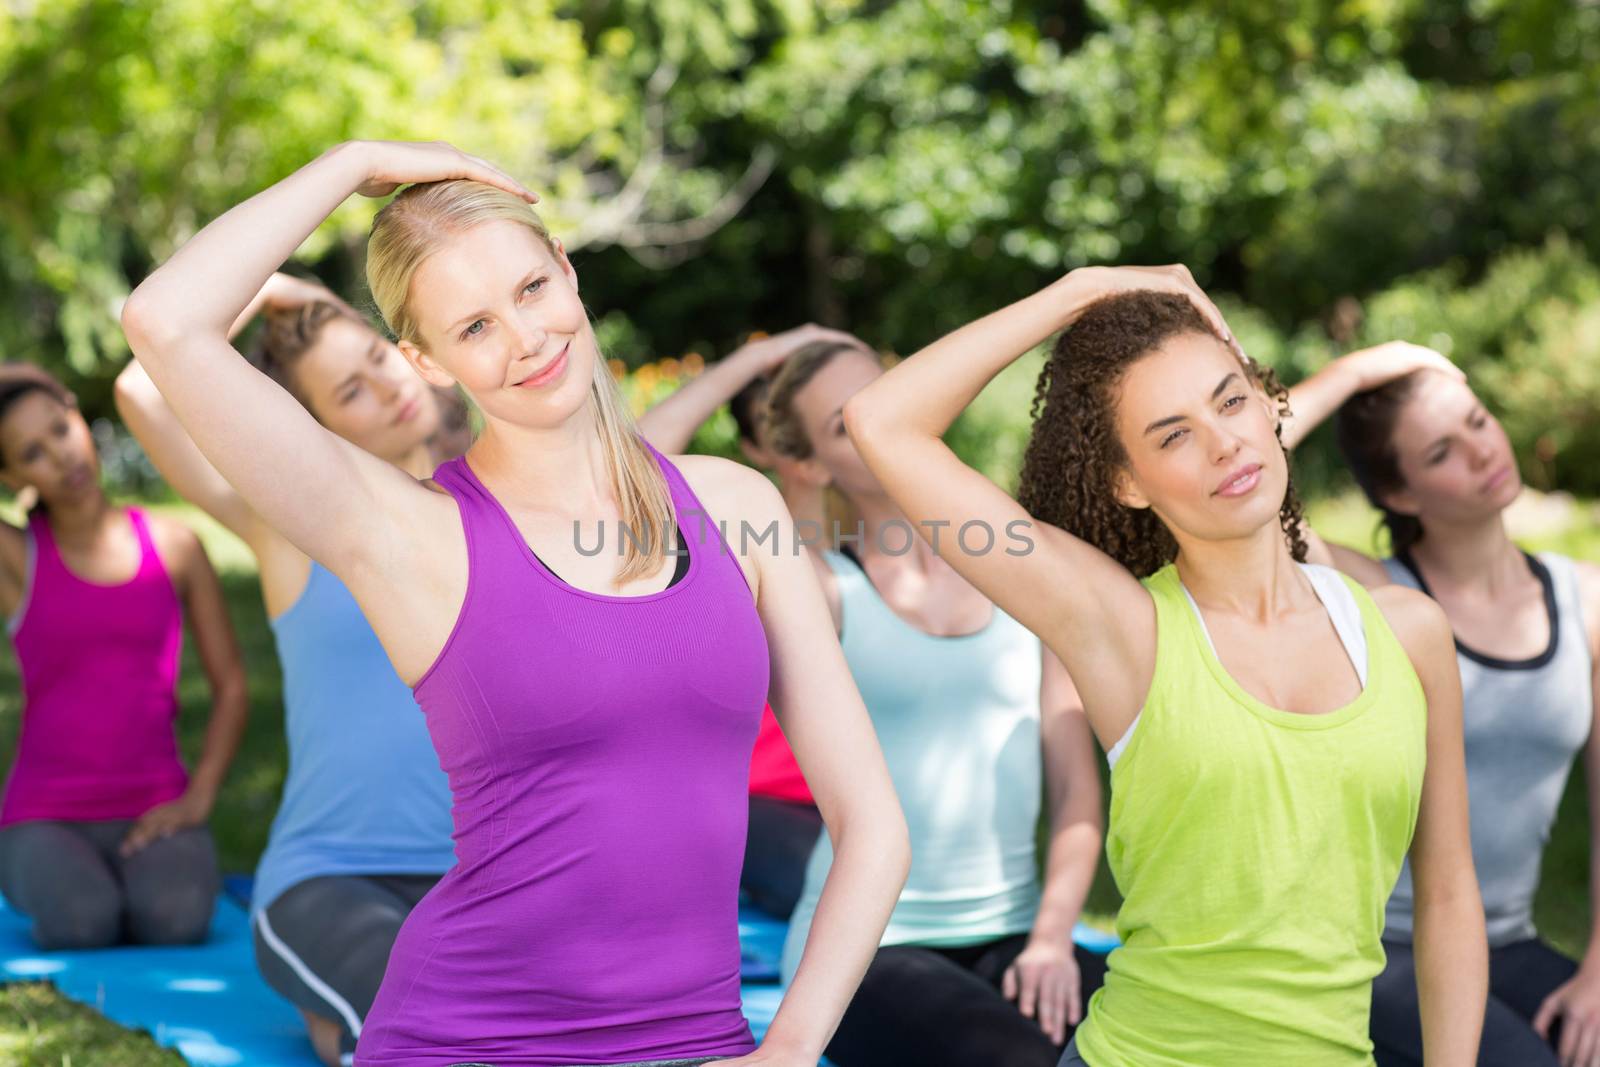 Fitness group doing yoga in park on a sunny day